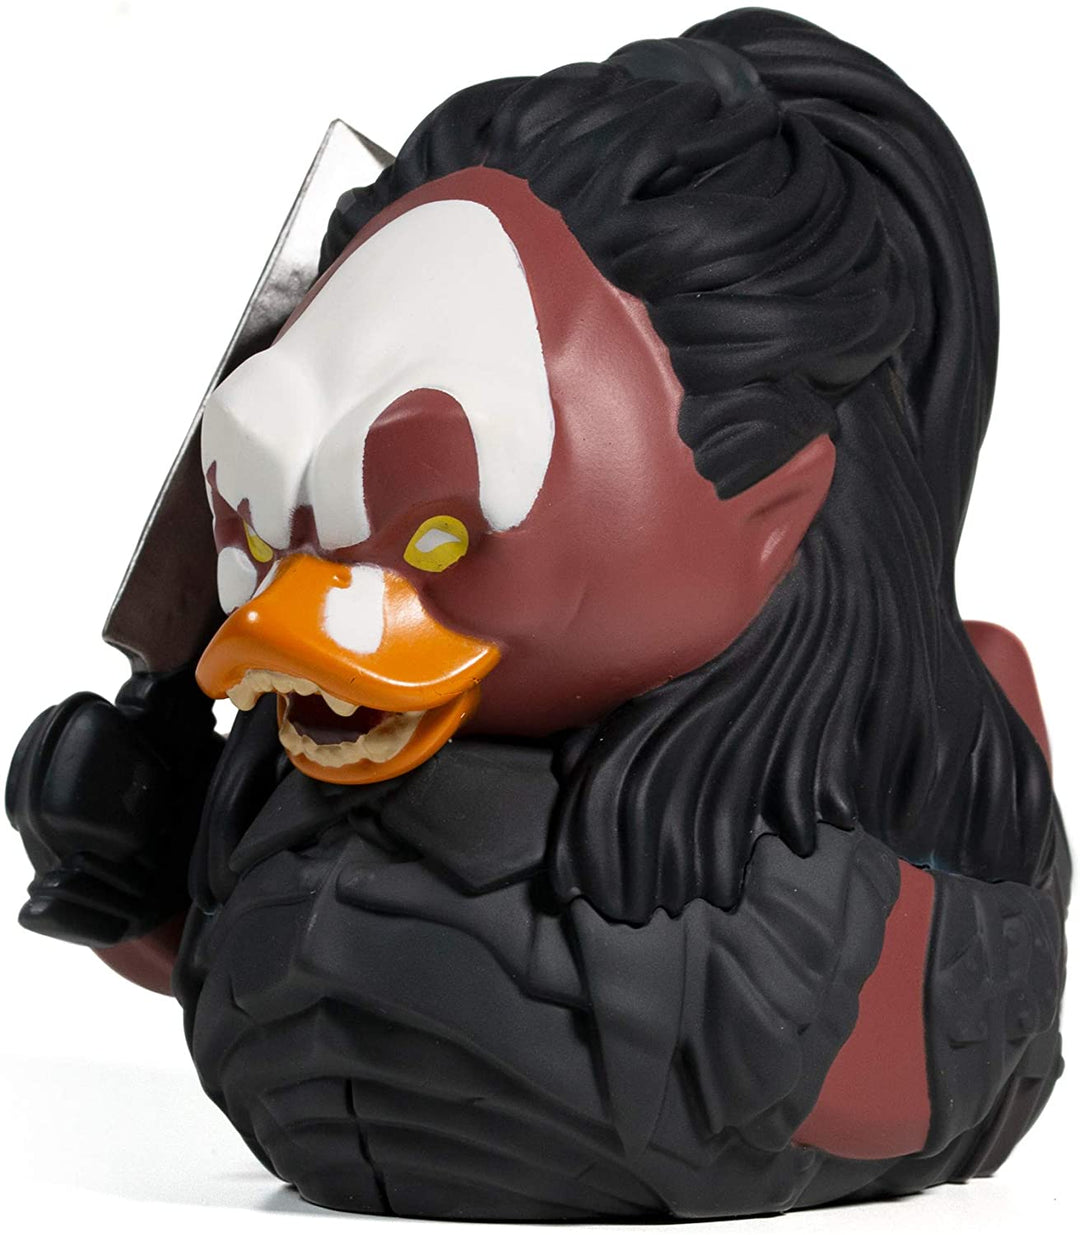 TUBBZ Lord Of The Rings Lurtz Collectible Rubber Duck Figurine – Official Lord Of The Rings Merchandise – Unique Limited Edition Collectors Vinyl Gift